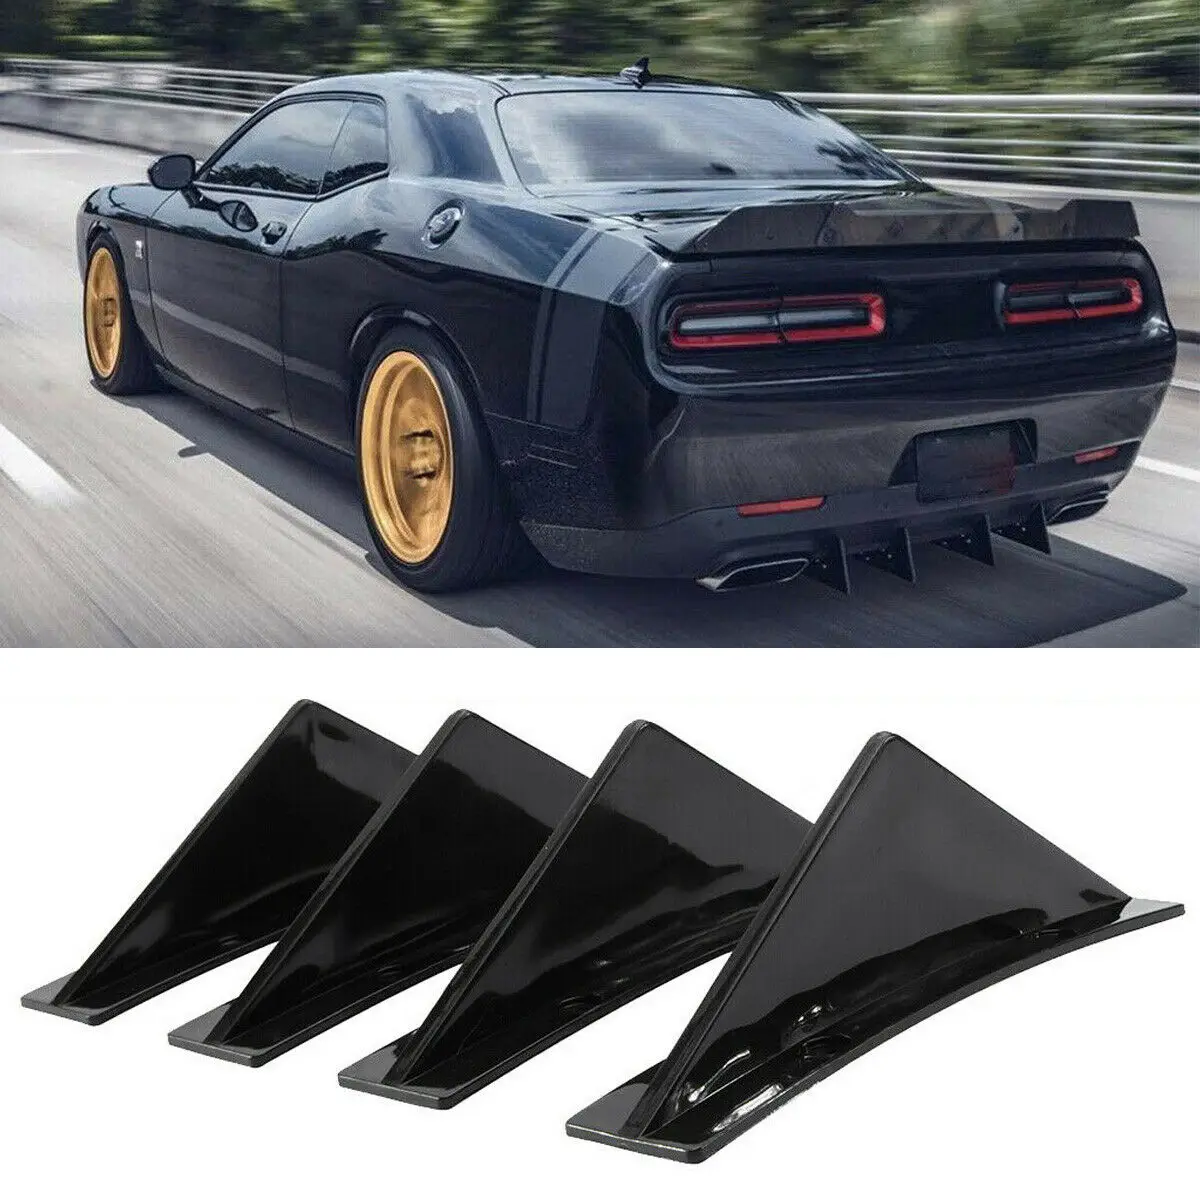 Rear Bumper Diffuser Shark Fins Aprons Cover Sticker Universal For Dodge Charger Challenger SRT RT 2016-2022 Car Accessories